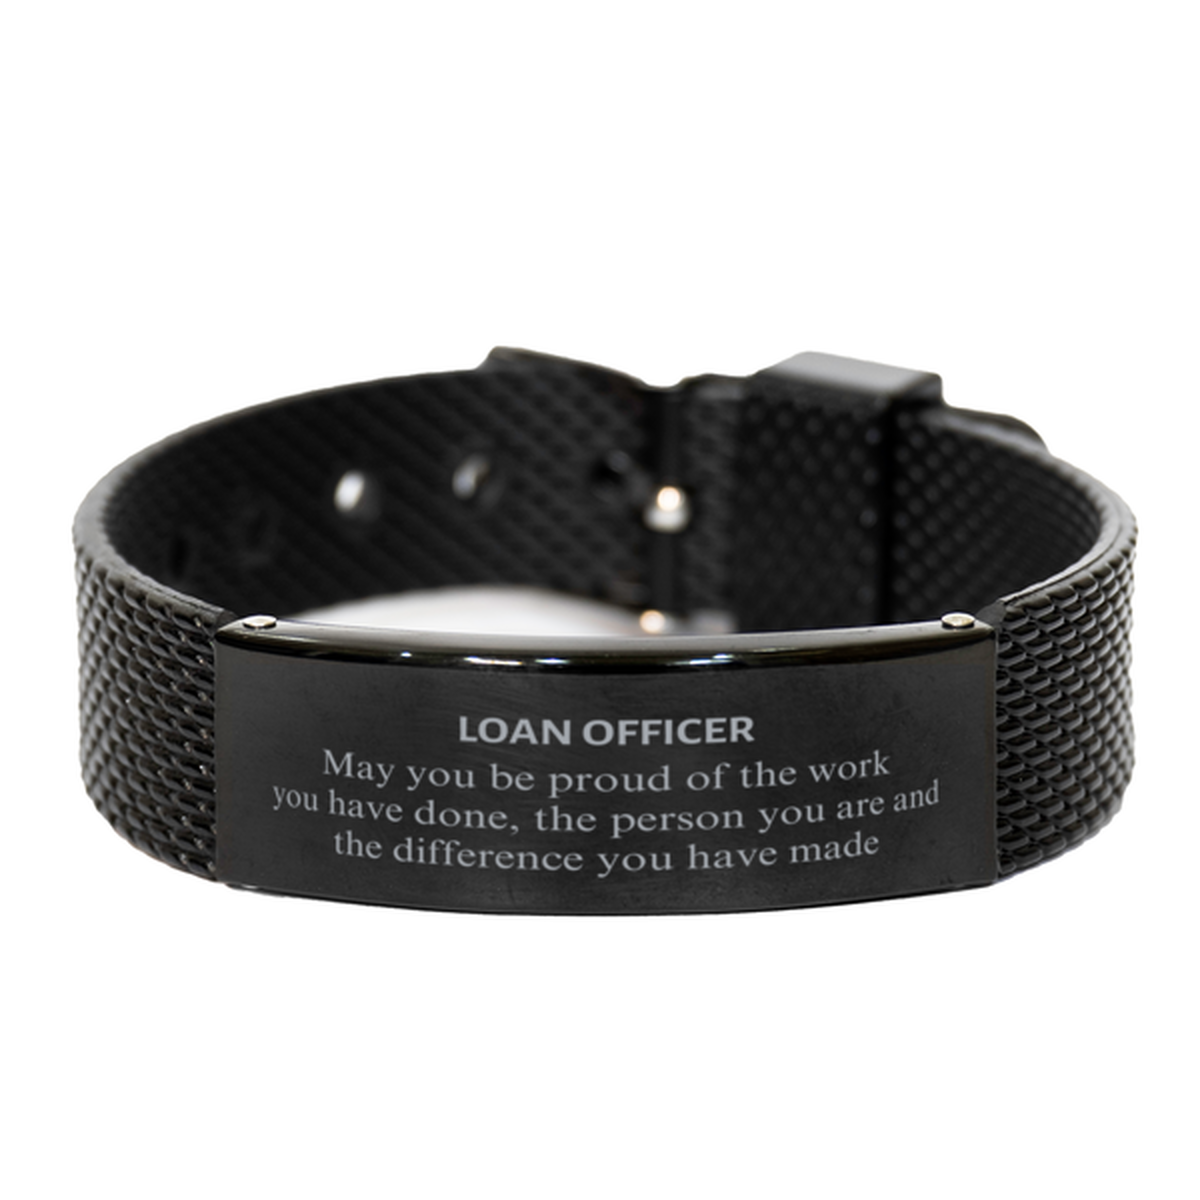 Loan Officer May you be proud of the work you have done, Retirement Loan Officer Black Shark Mesh Bracelet for Colleague Appreciation Gifts Amazing for Loan Officer